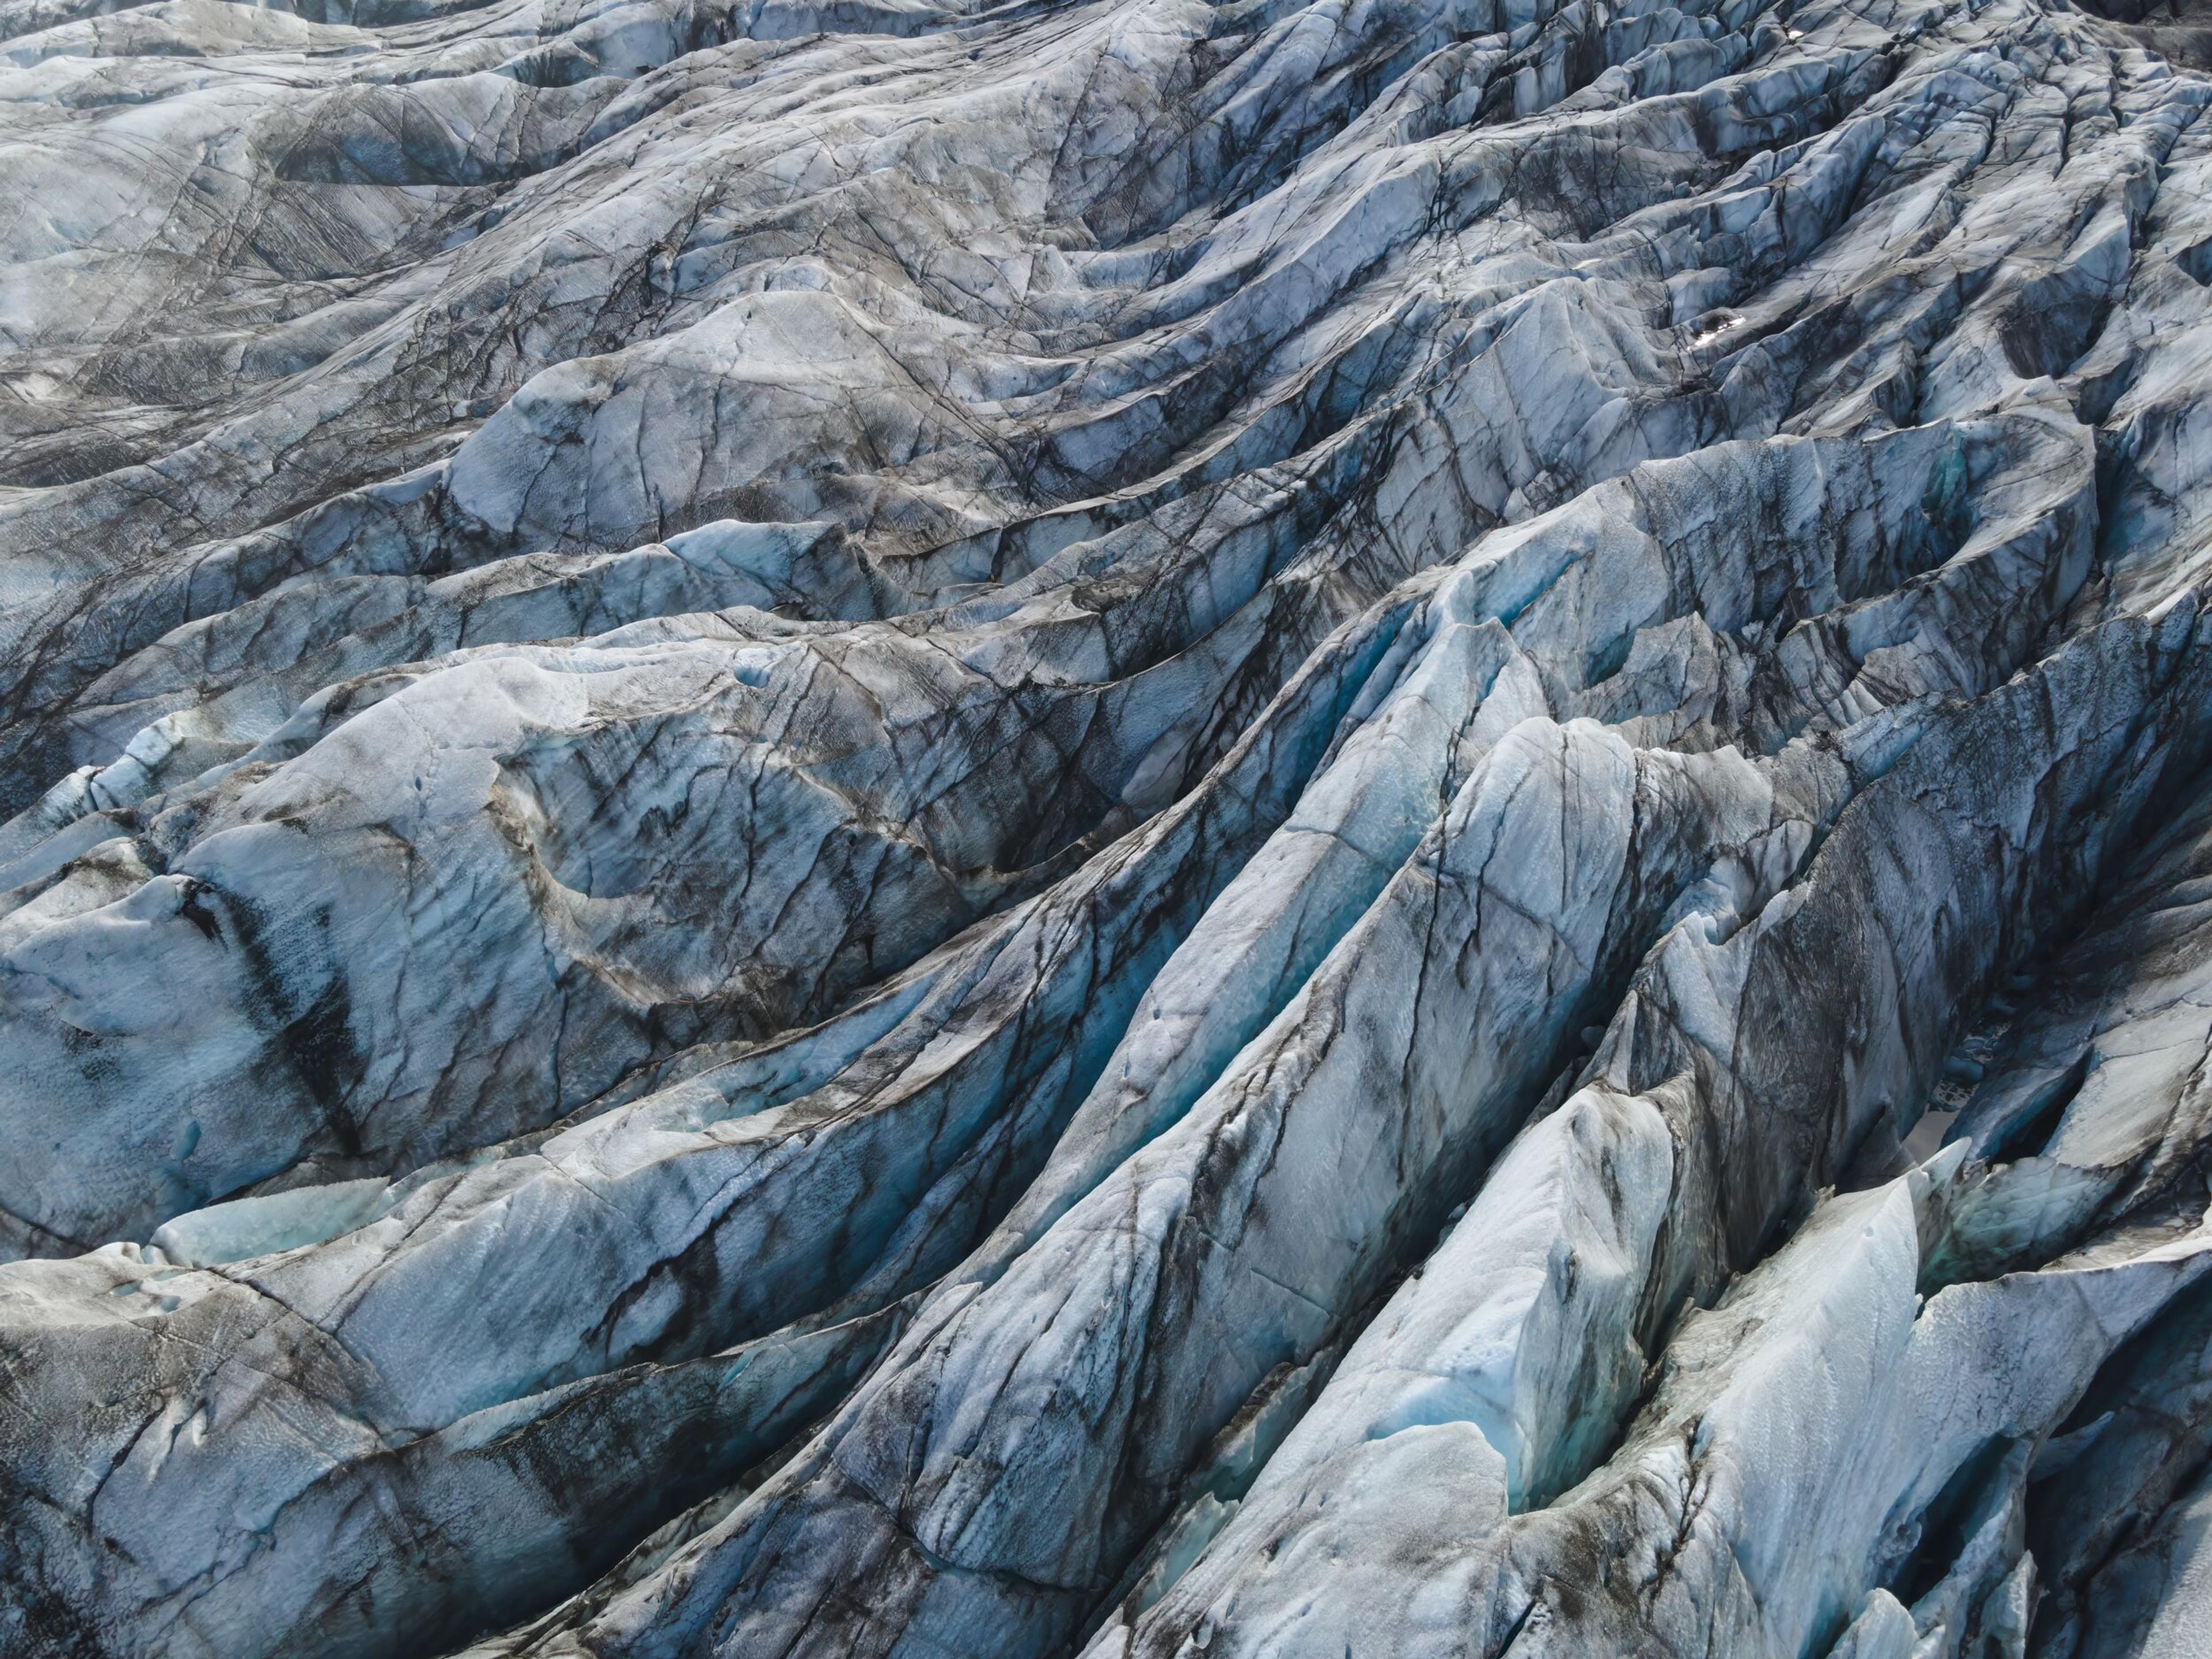 Close-up aerial view of a glacier with deep crevasses and a pattern of dark sediment lines, highlighting the dynamic and rugged texture of the ice.